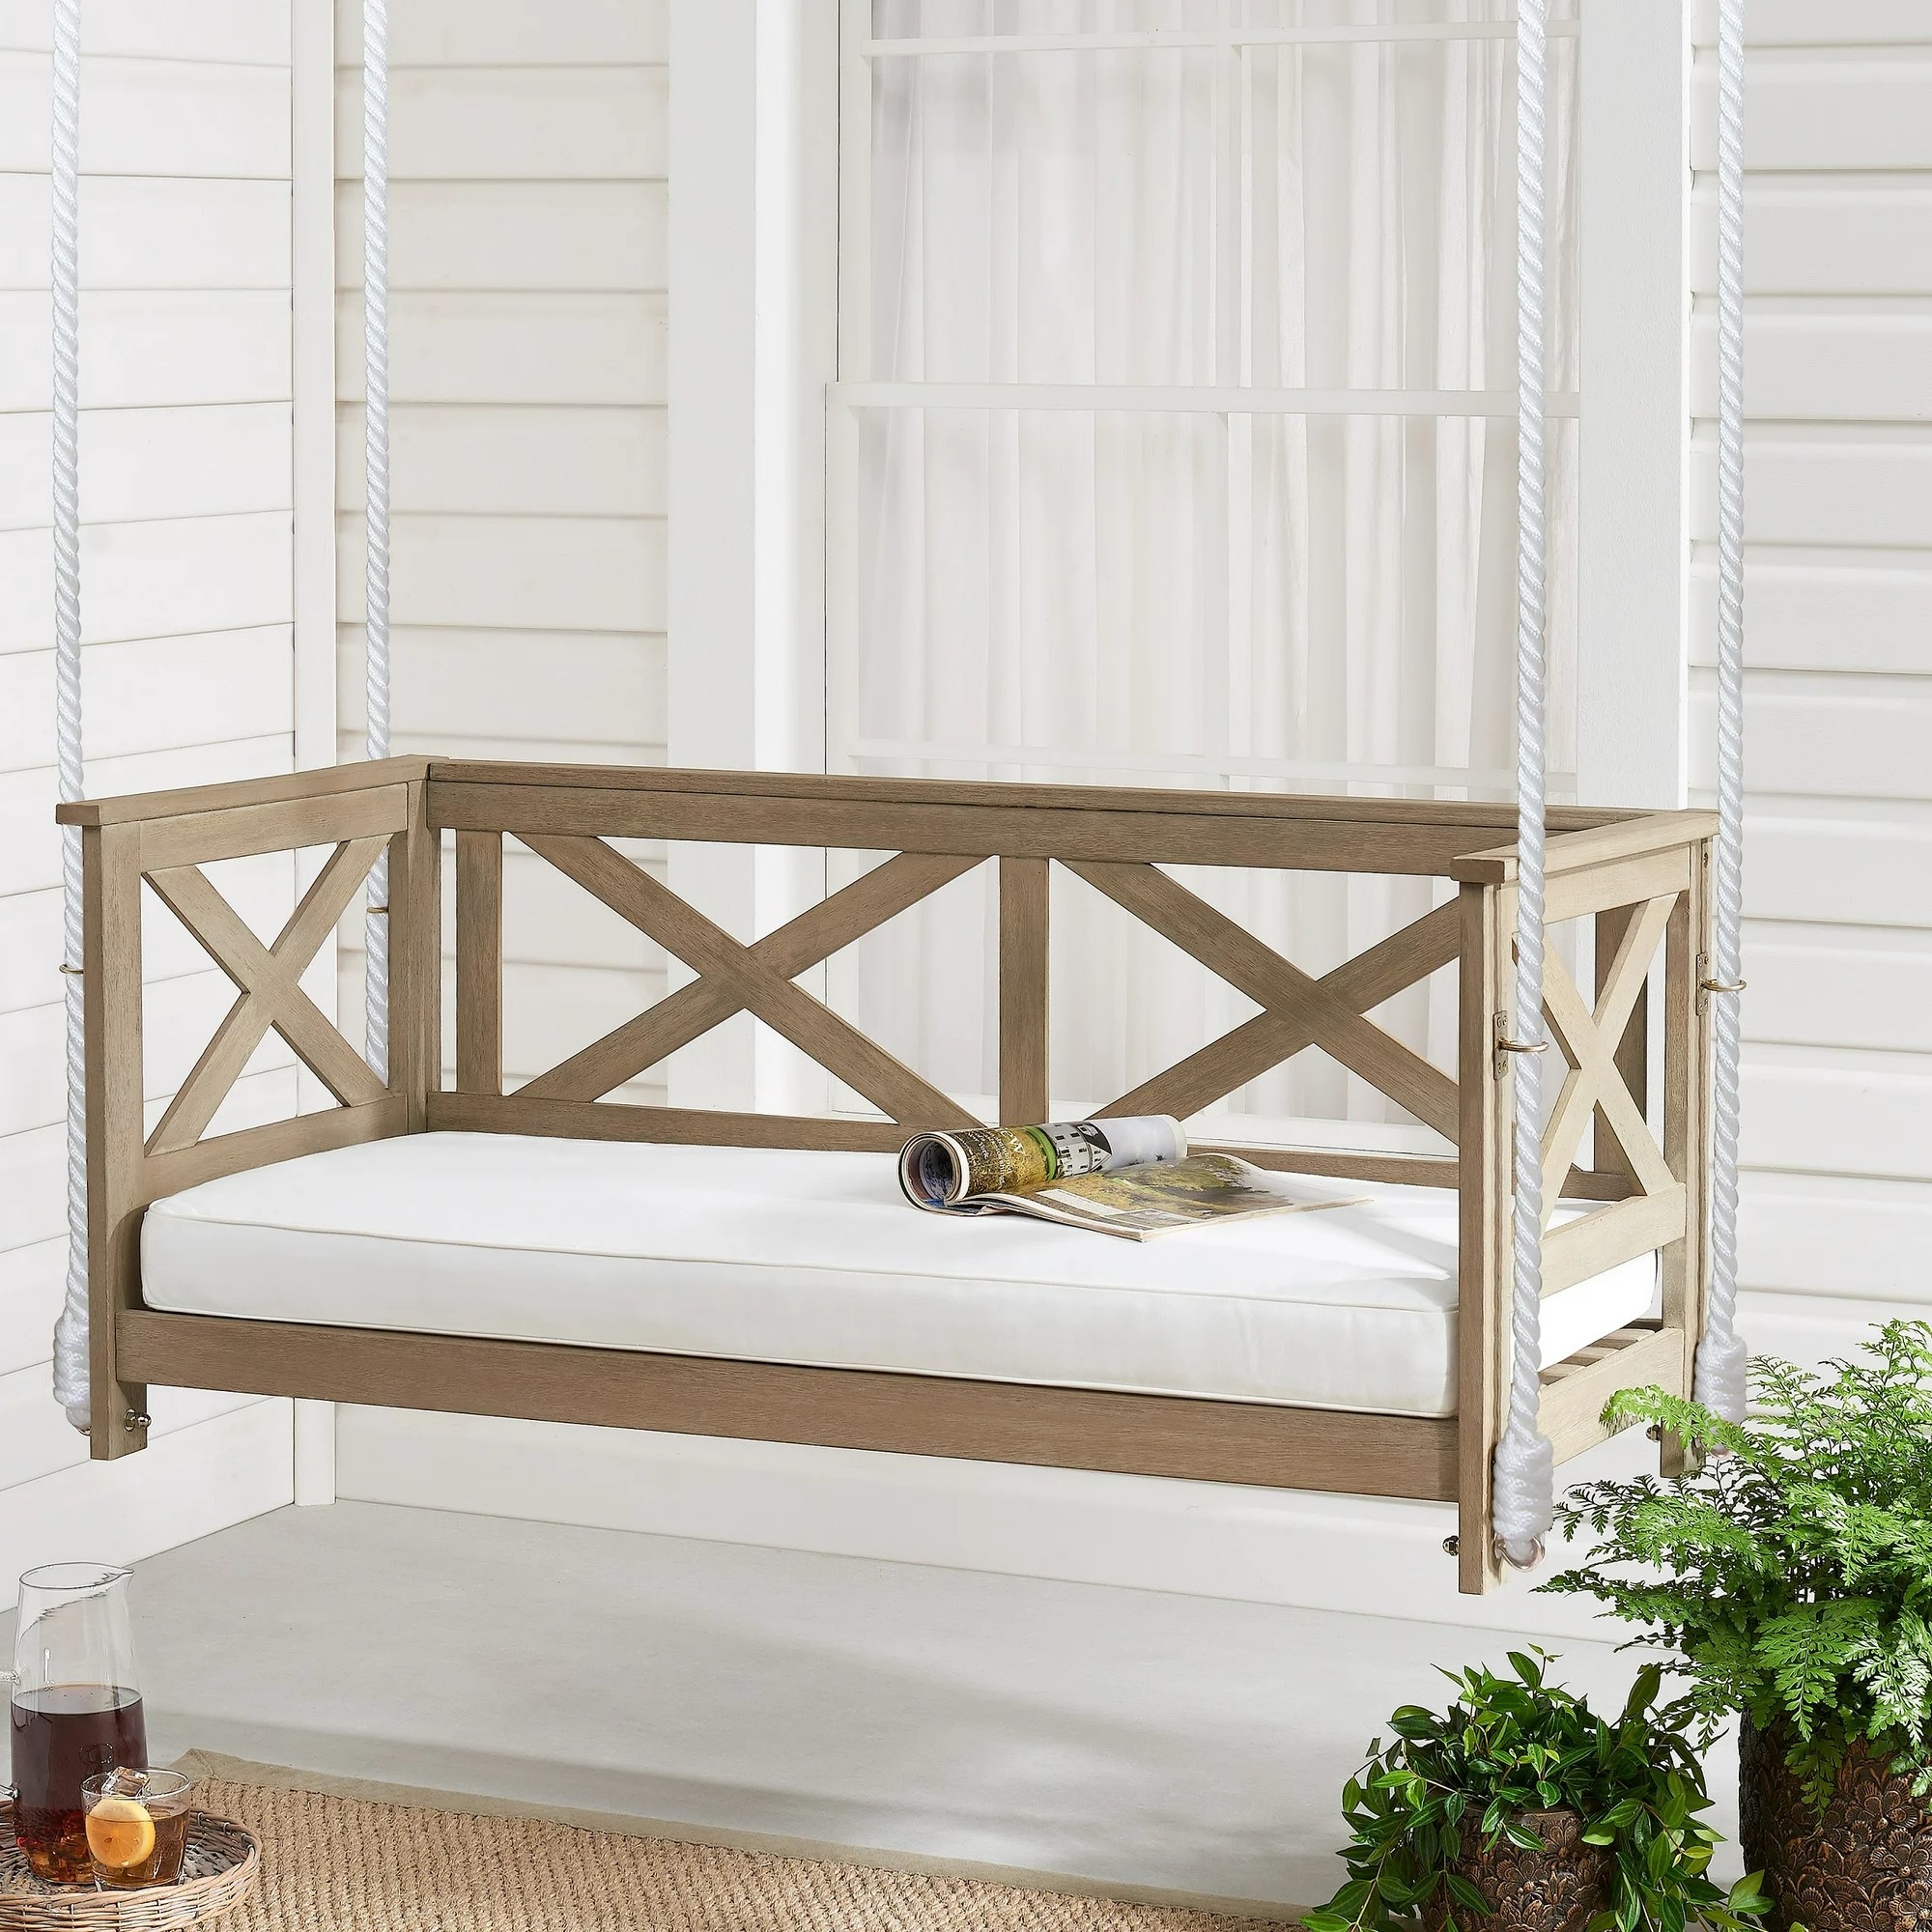 The wooden porch swing with a cushion hanging on a porch